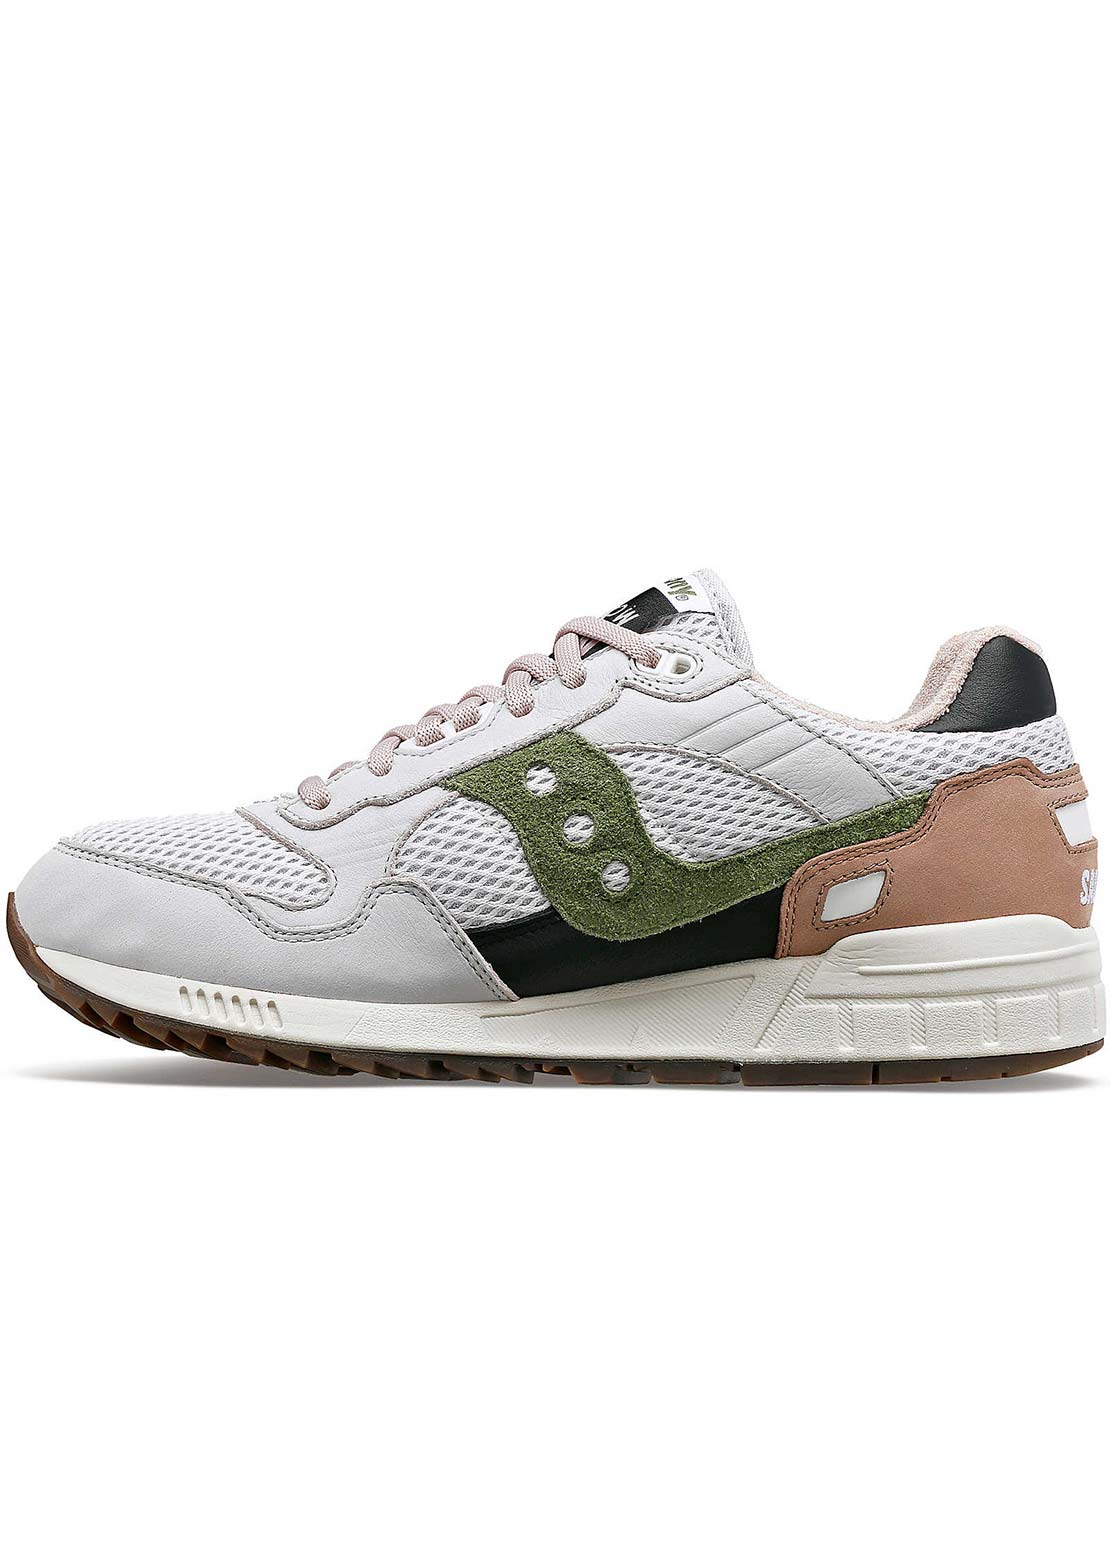 Saucony Unisex Shadow 5000 Shoes Grey/Green